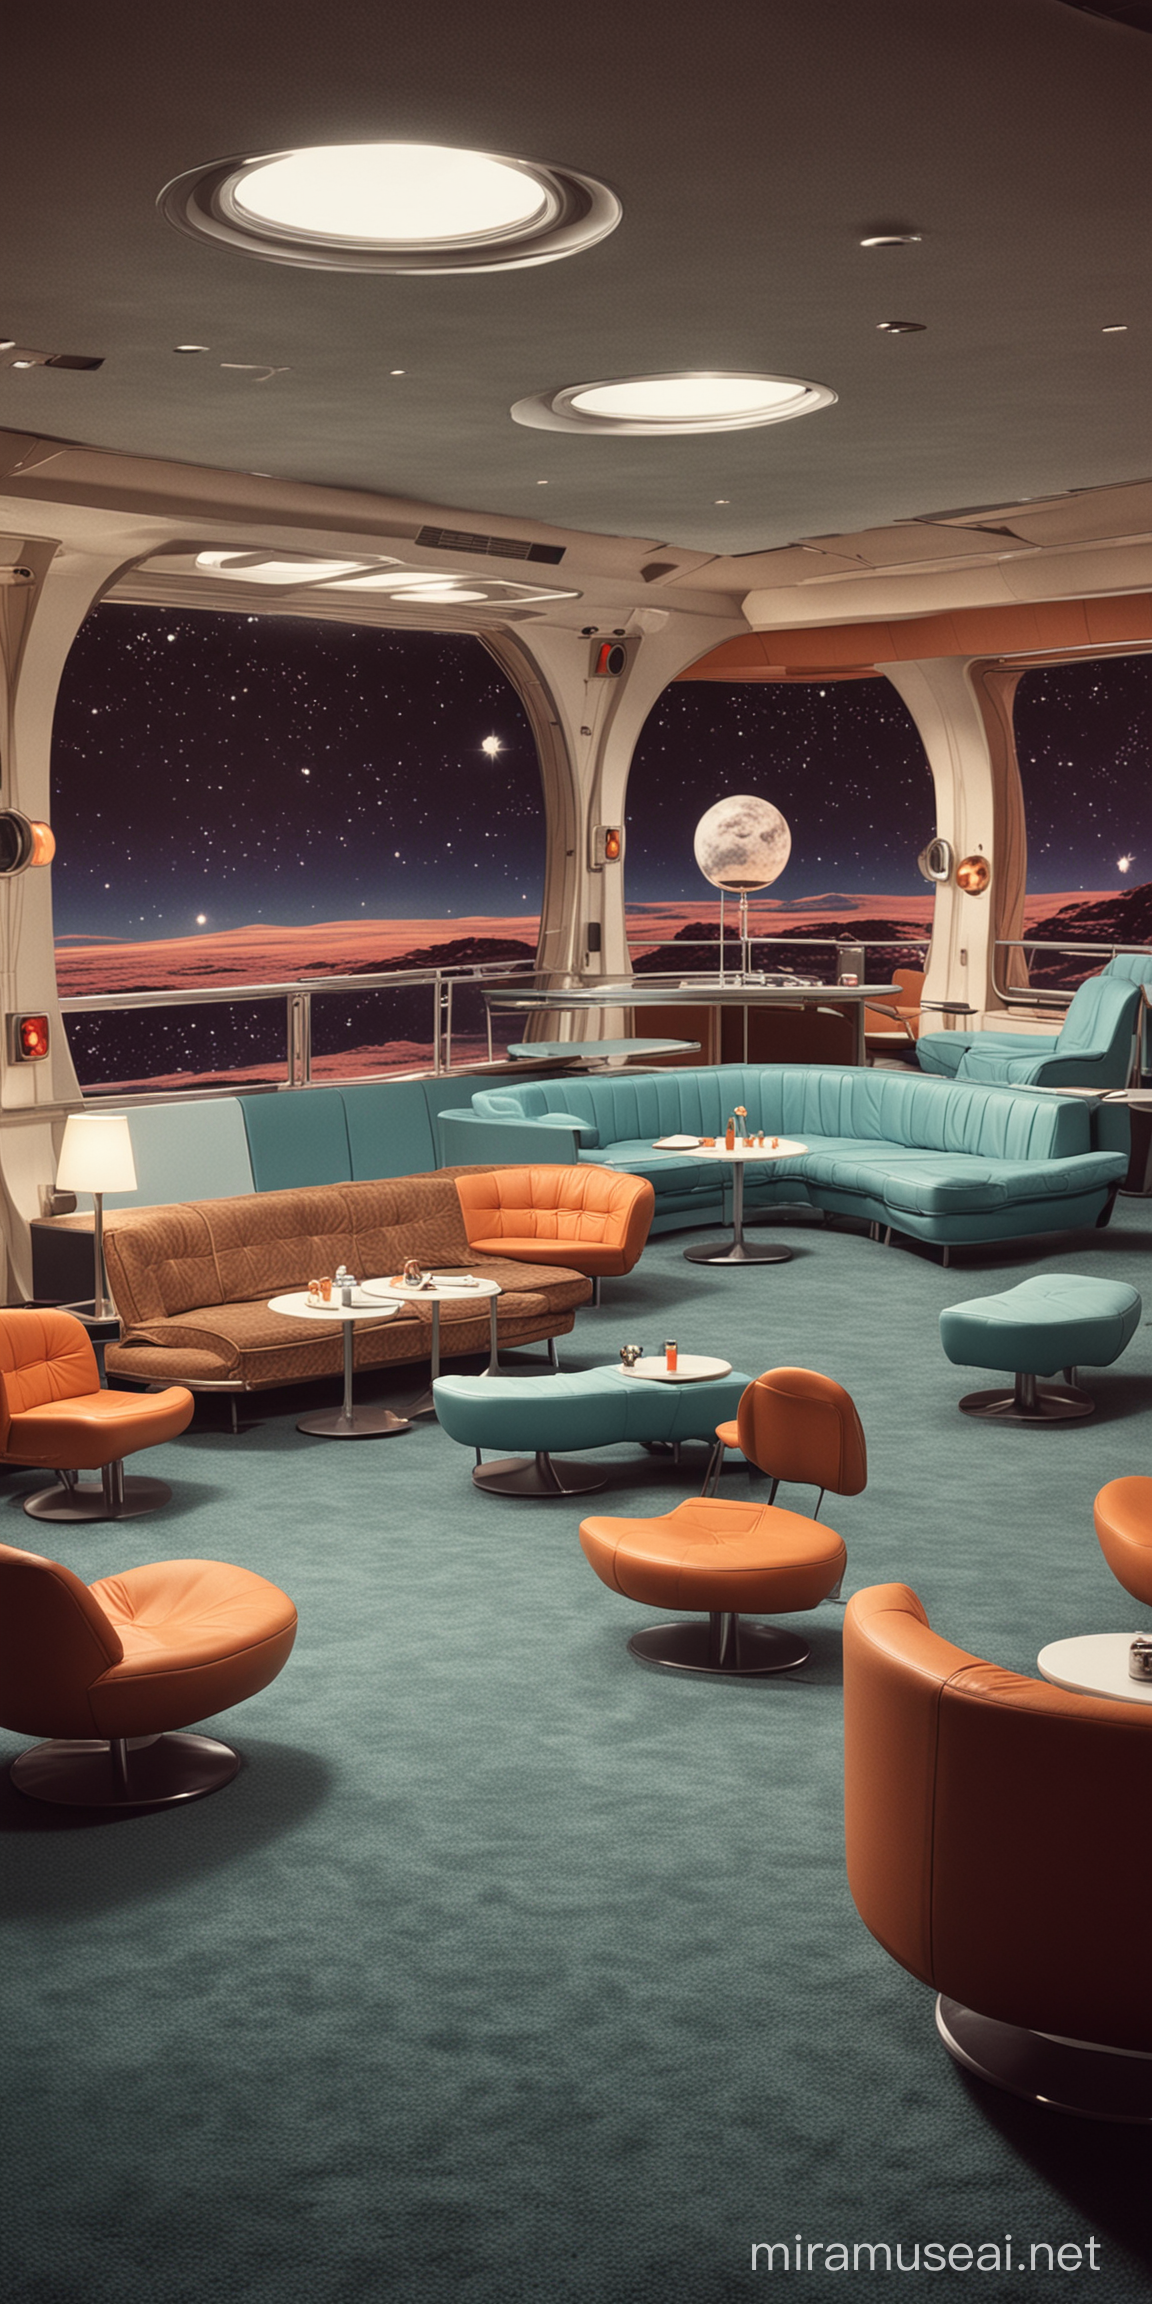 Retro Space Lounge Interior with 1960s Vibes